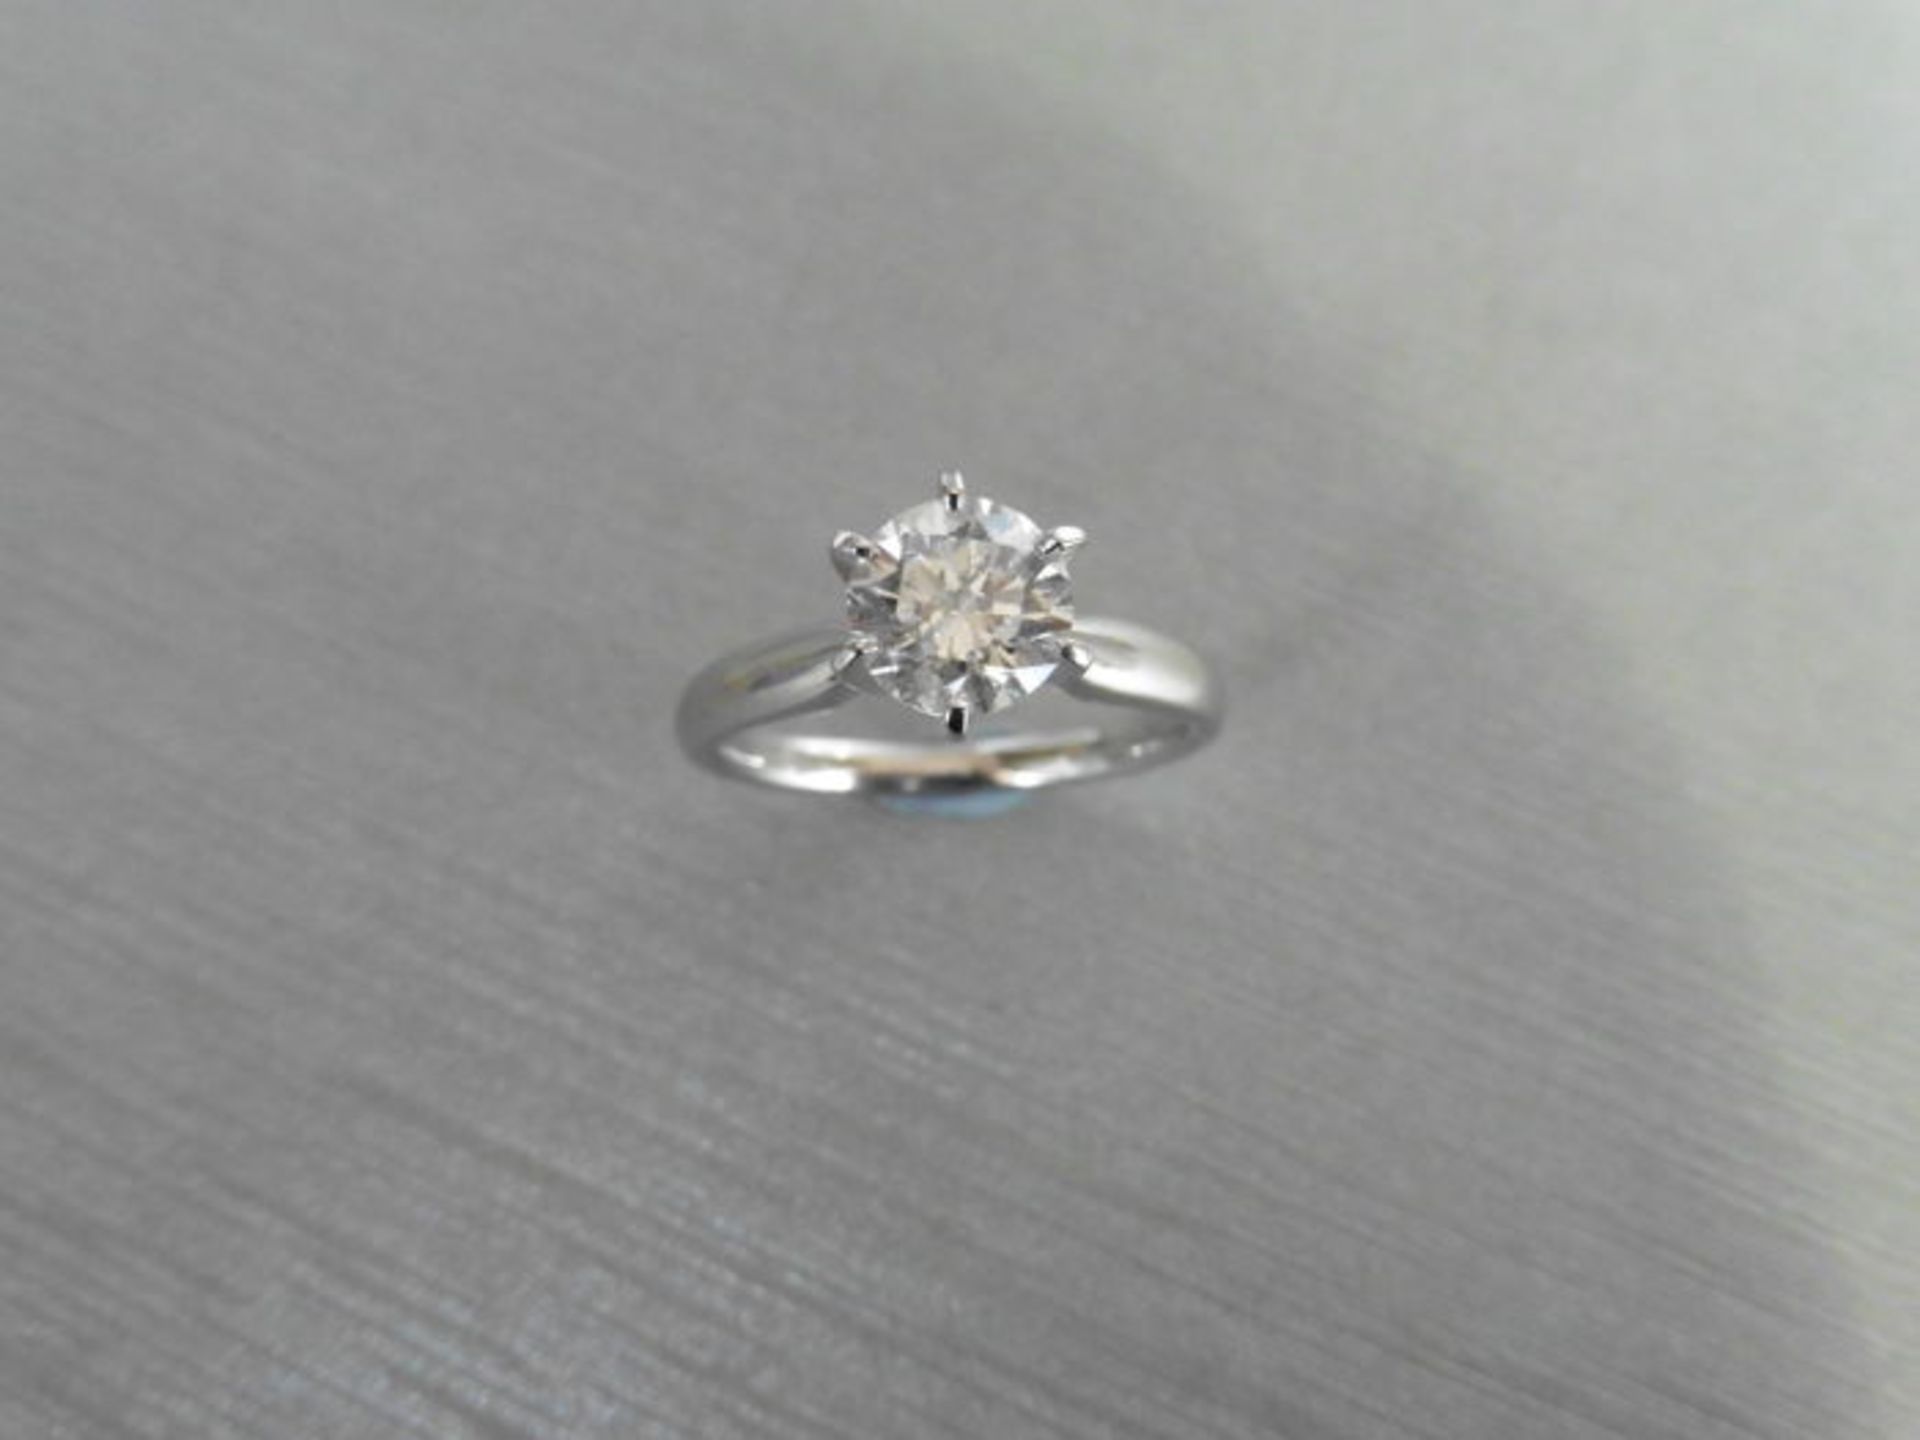 1.05ct Diamond solitaire ring with a brilliant cut diamond, H colour and Si1 clarity. Set in - Image 4 of 4